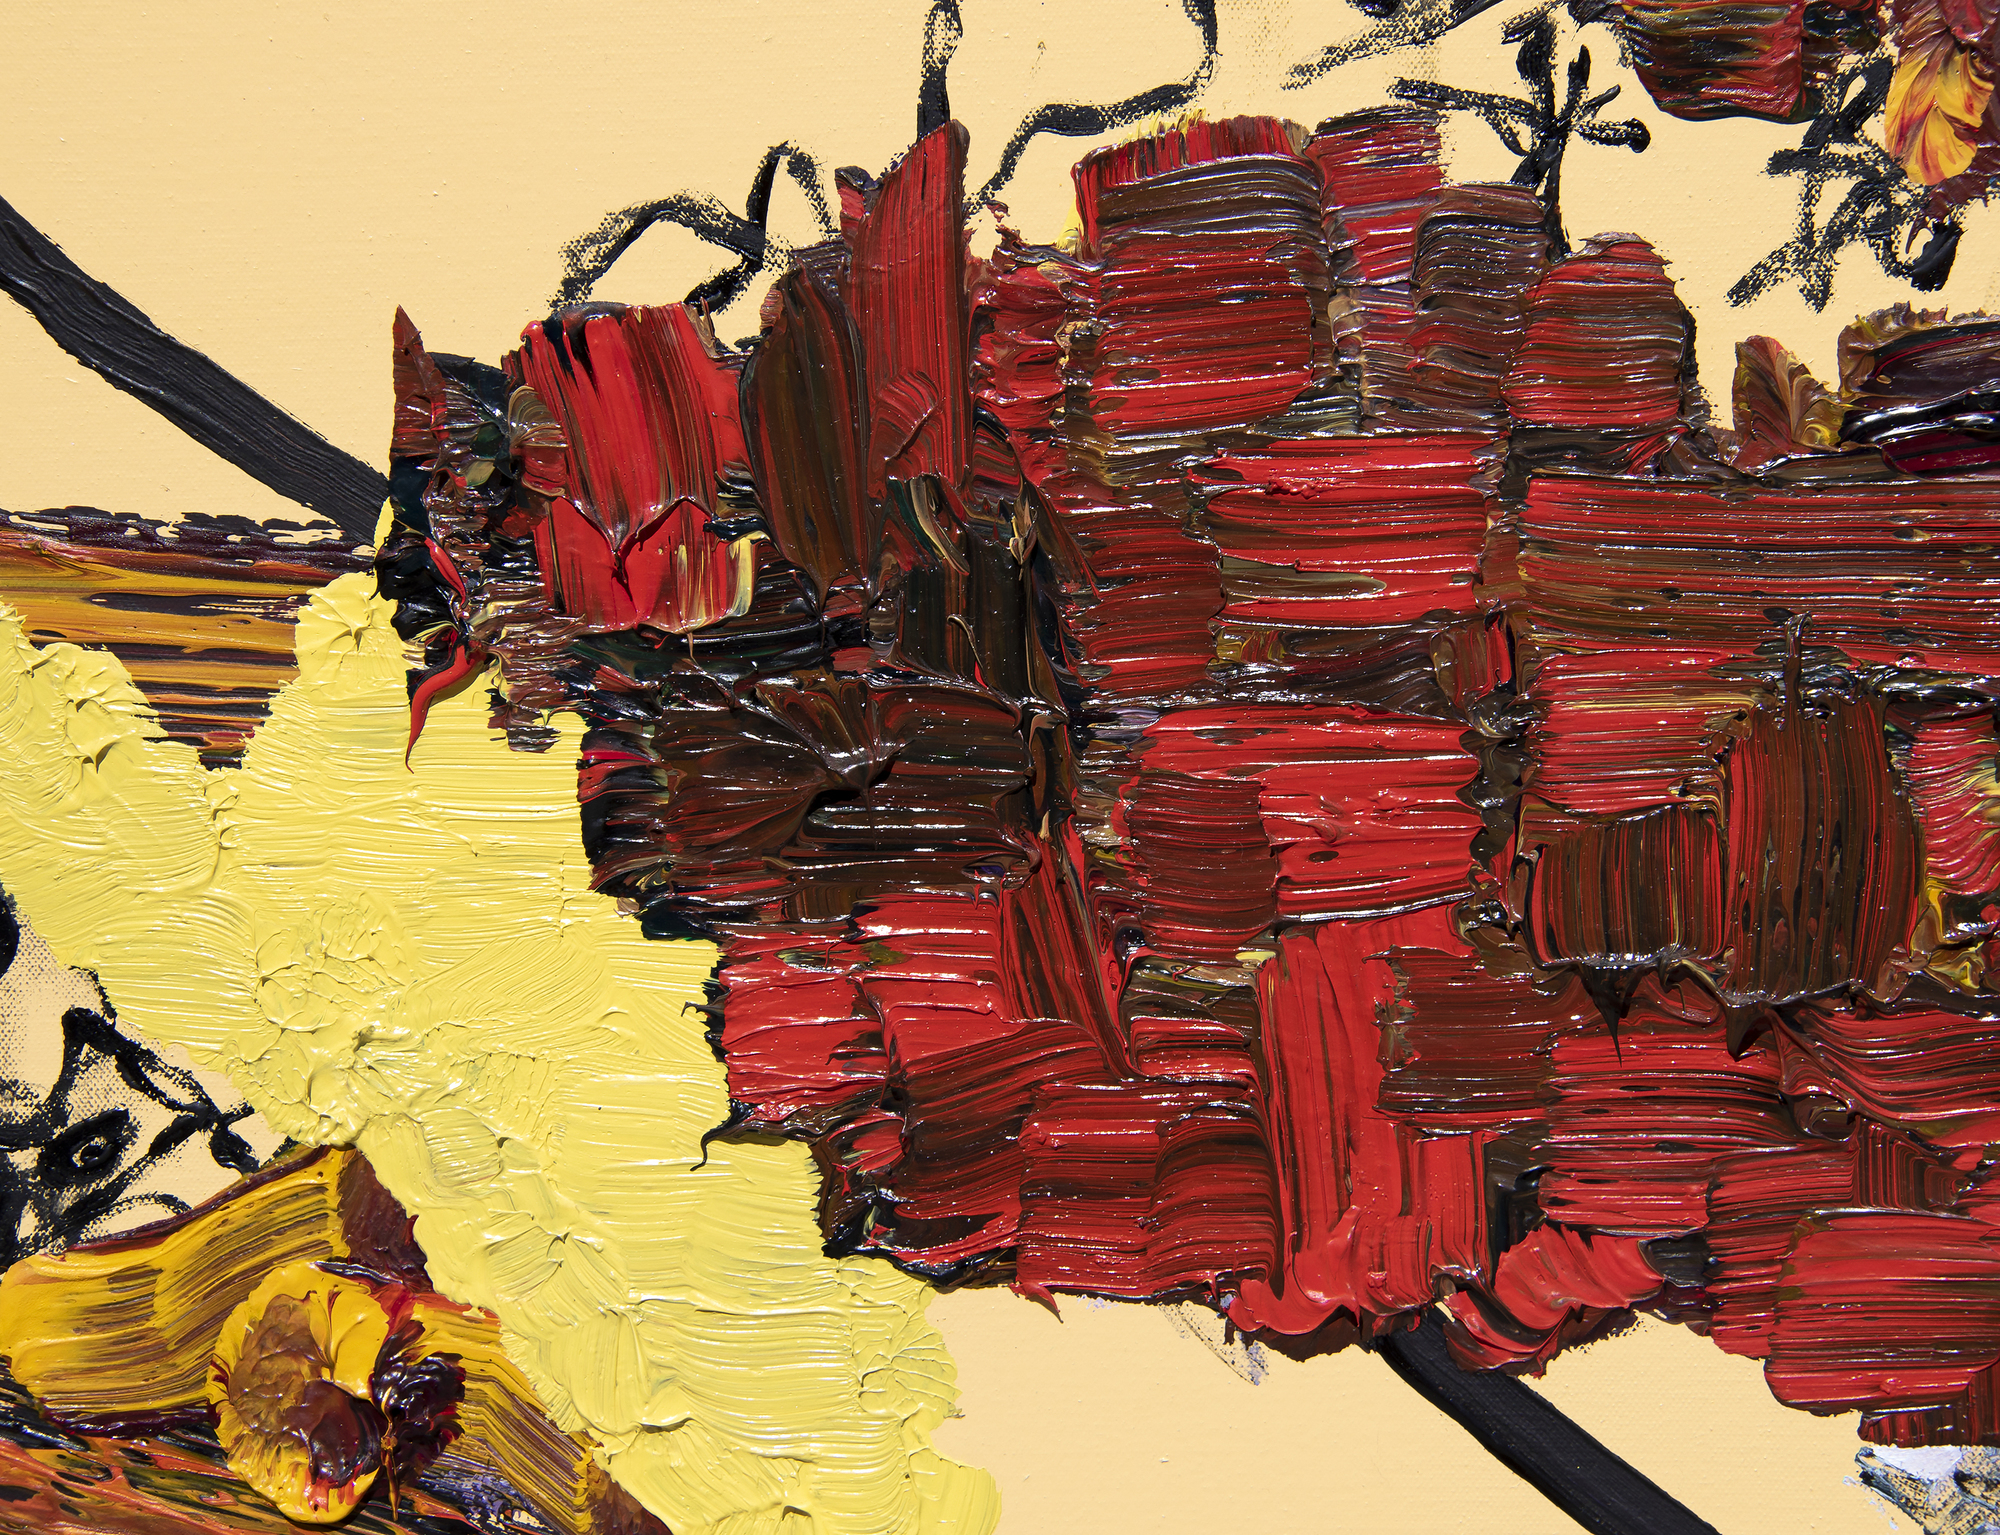 FIONA RAE - Untitled (yellow, red + brown) - oil on canvas - 72 x 78 in.